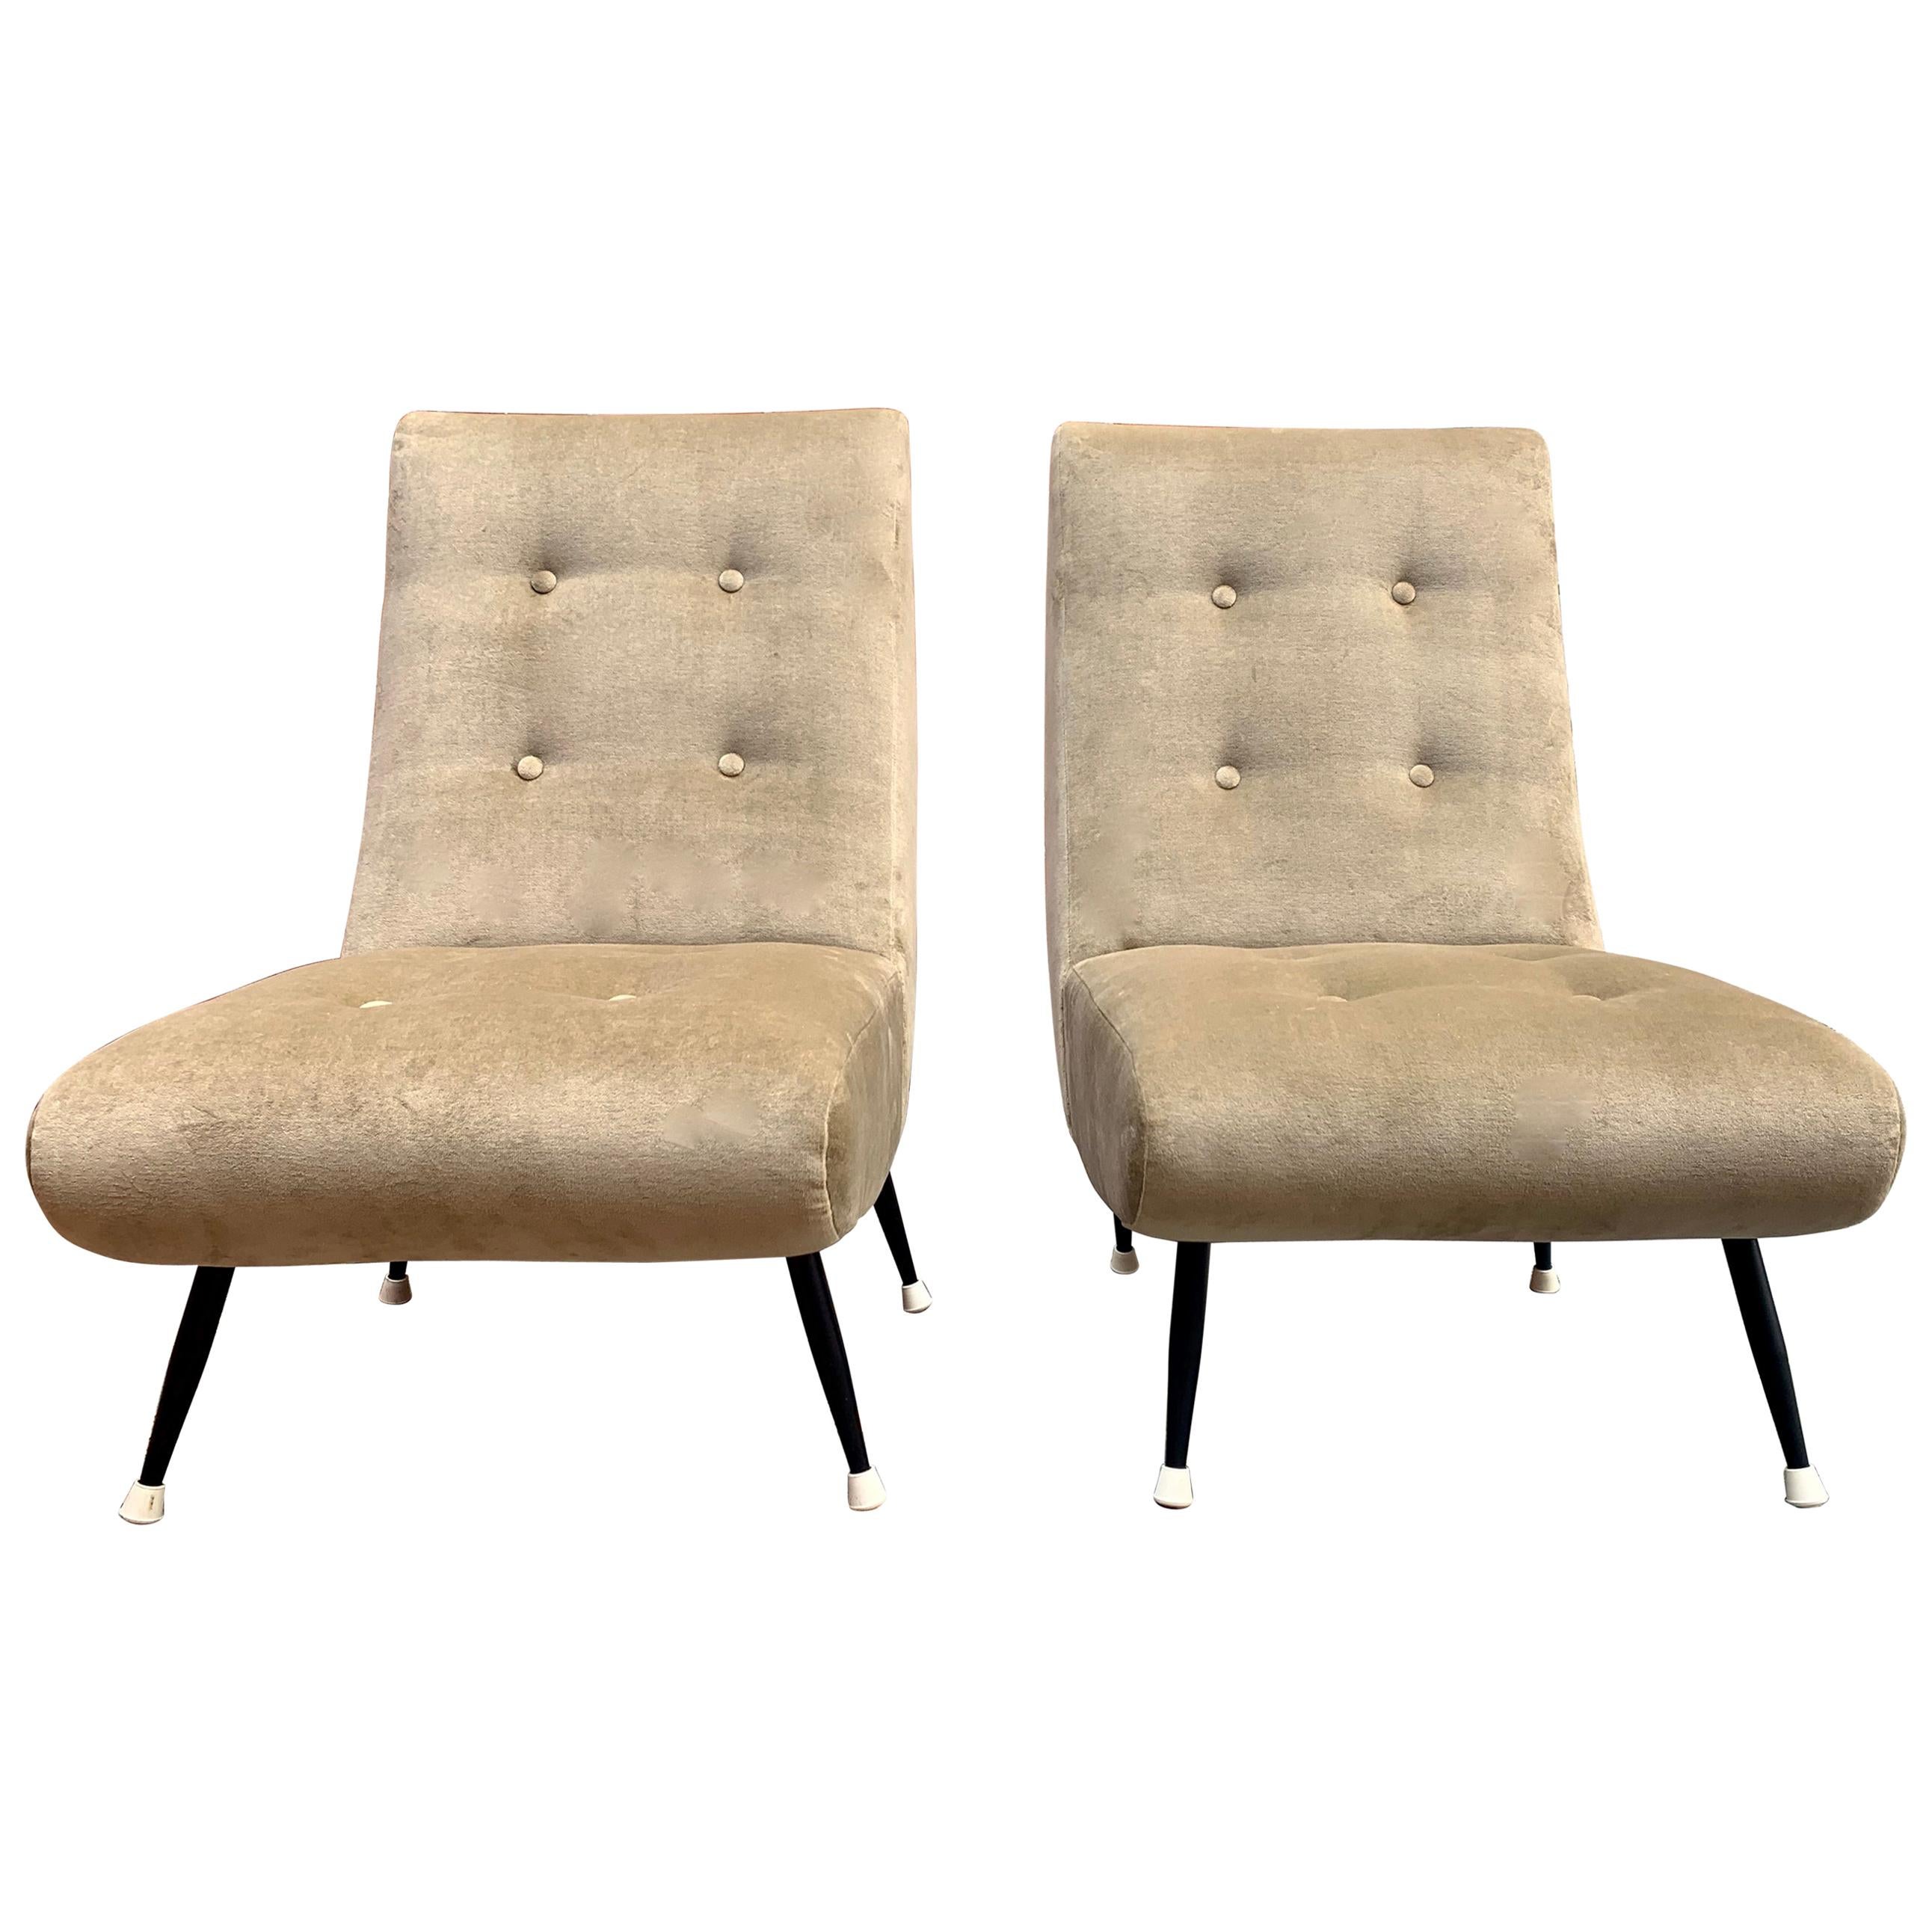 Pair of Gio Ponti Style Italian Tufted Chairs in Taupe Velvet